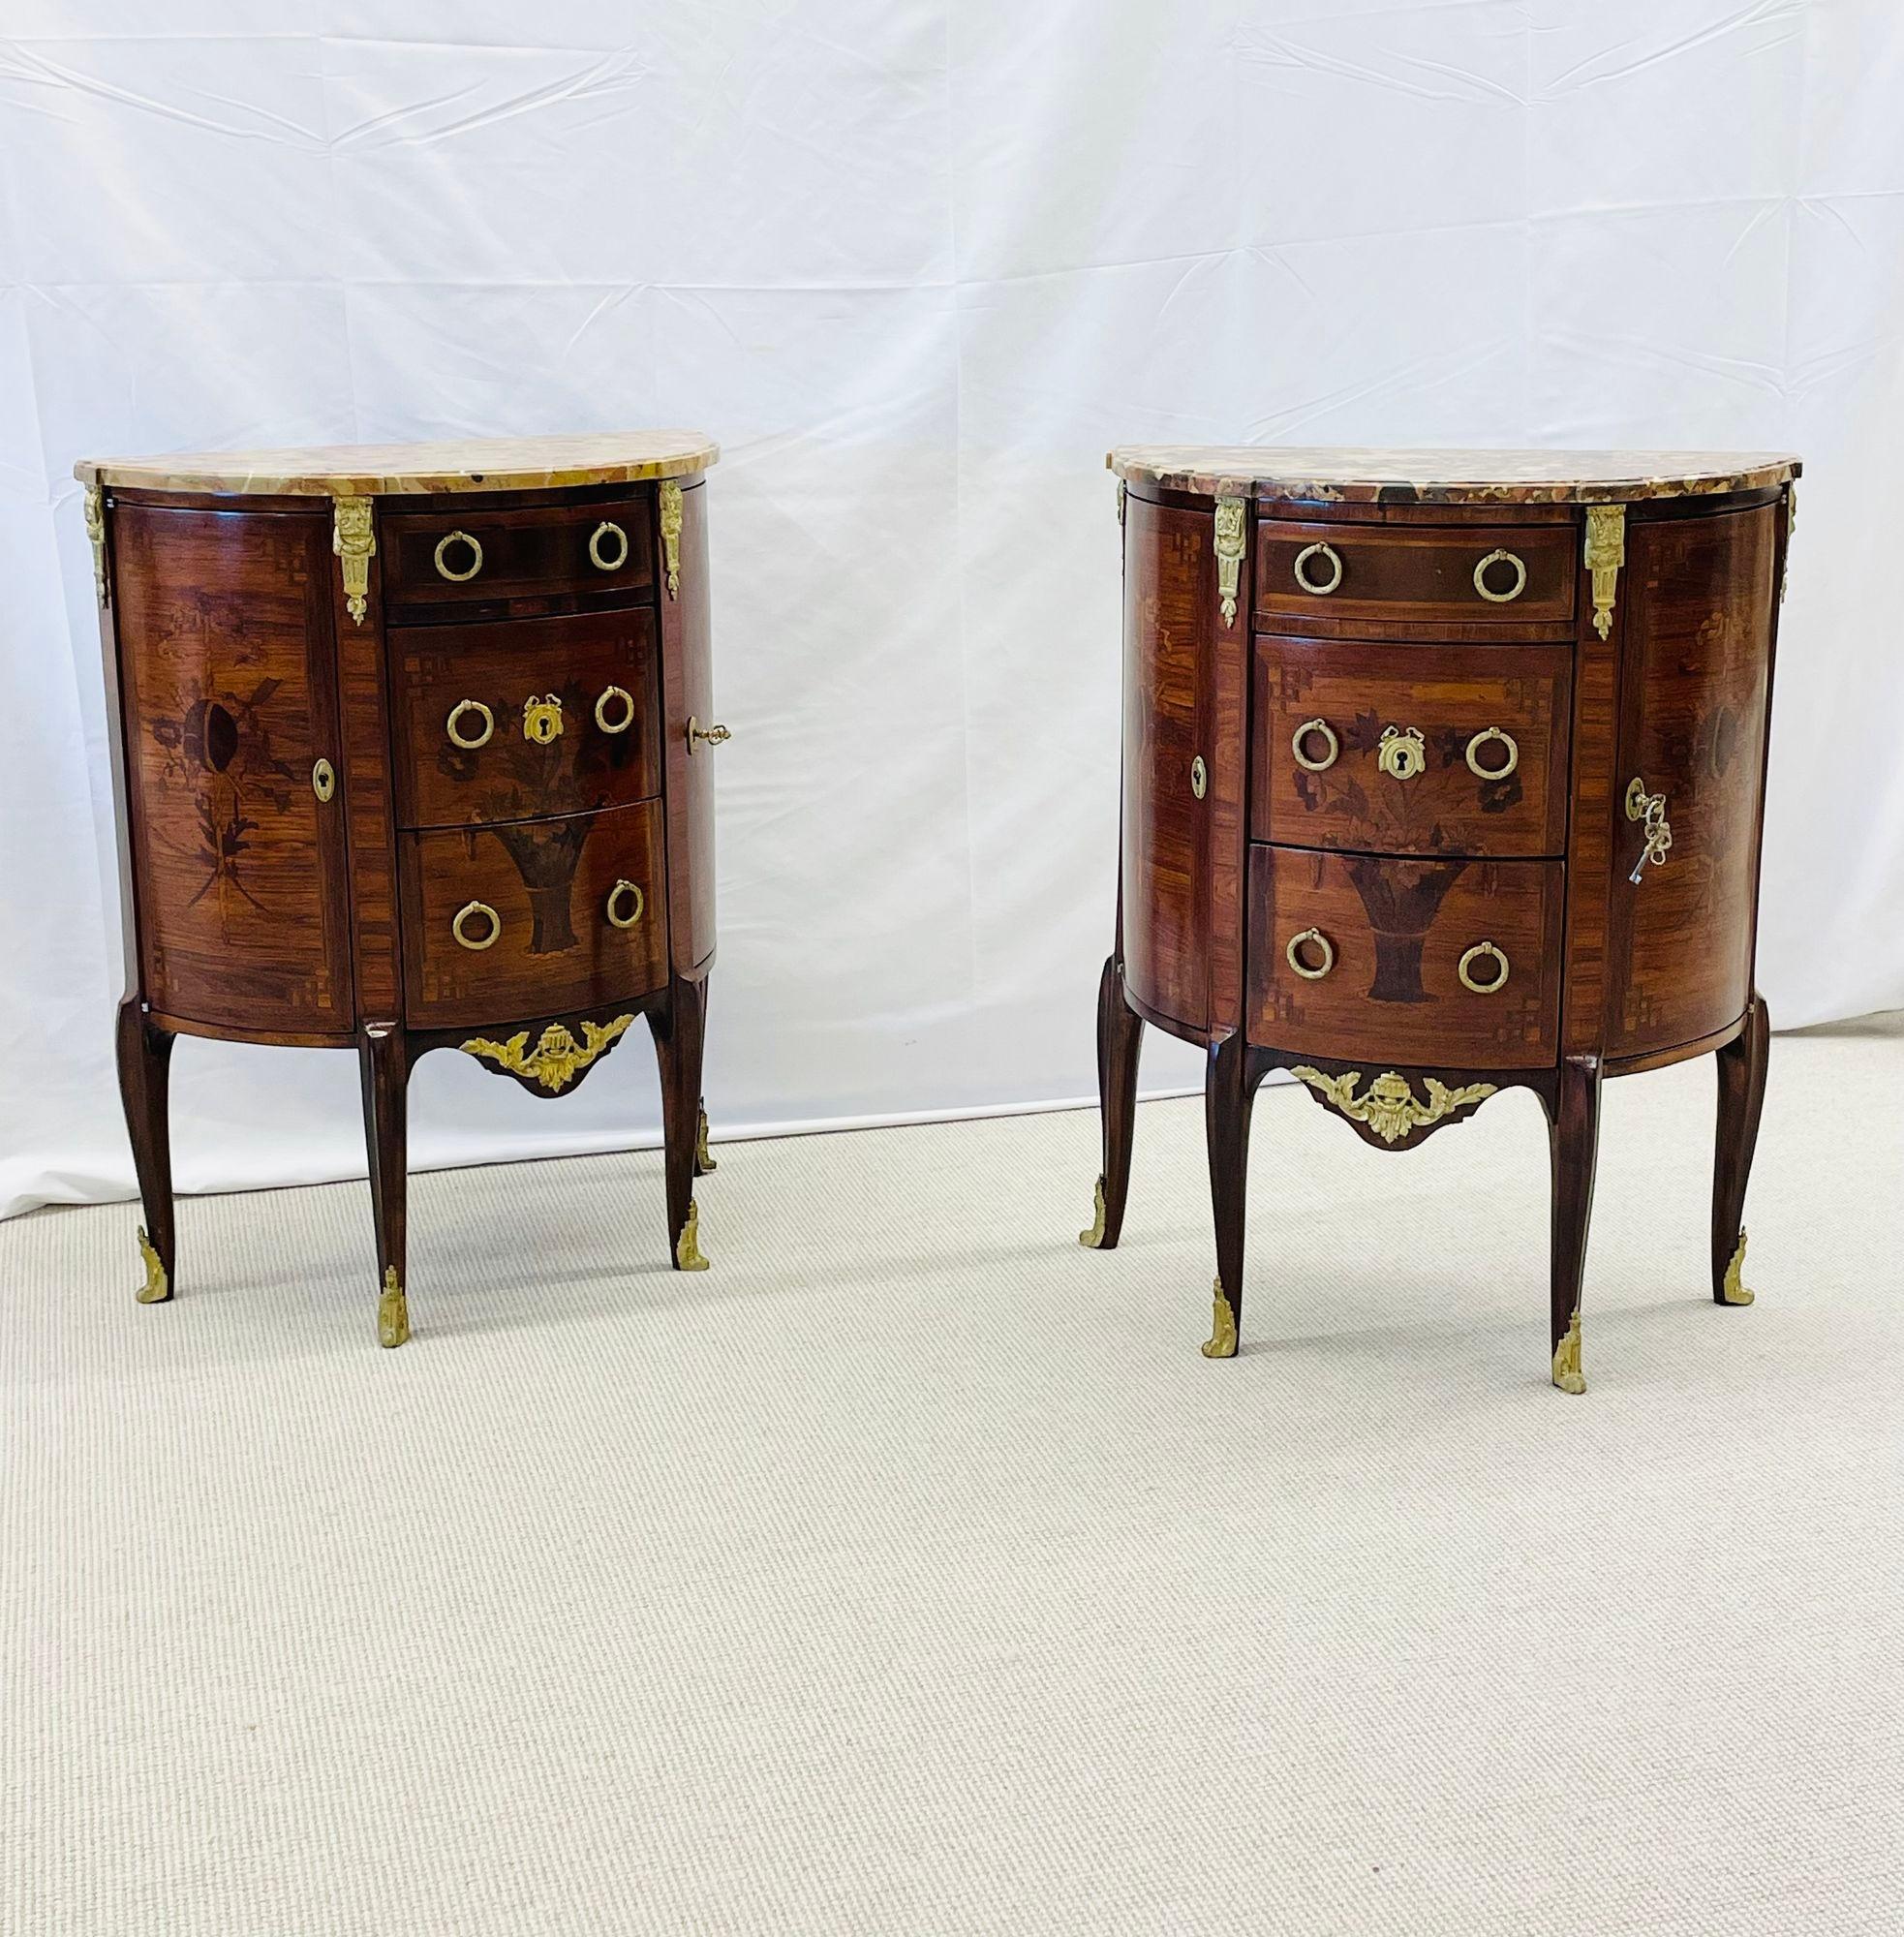 Pair of Fine Louis XV Demilune Side Tables, Nightstands, Commodes, Marble, Bronze Mounts
 
A stunning pair of  demilune end tables, nightstands or commodes having an inlaid floral theme on the front as well as the side panels. The pair with fine